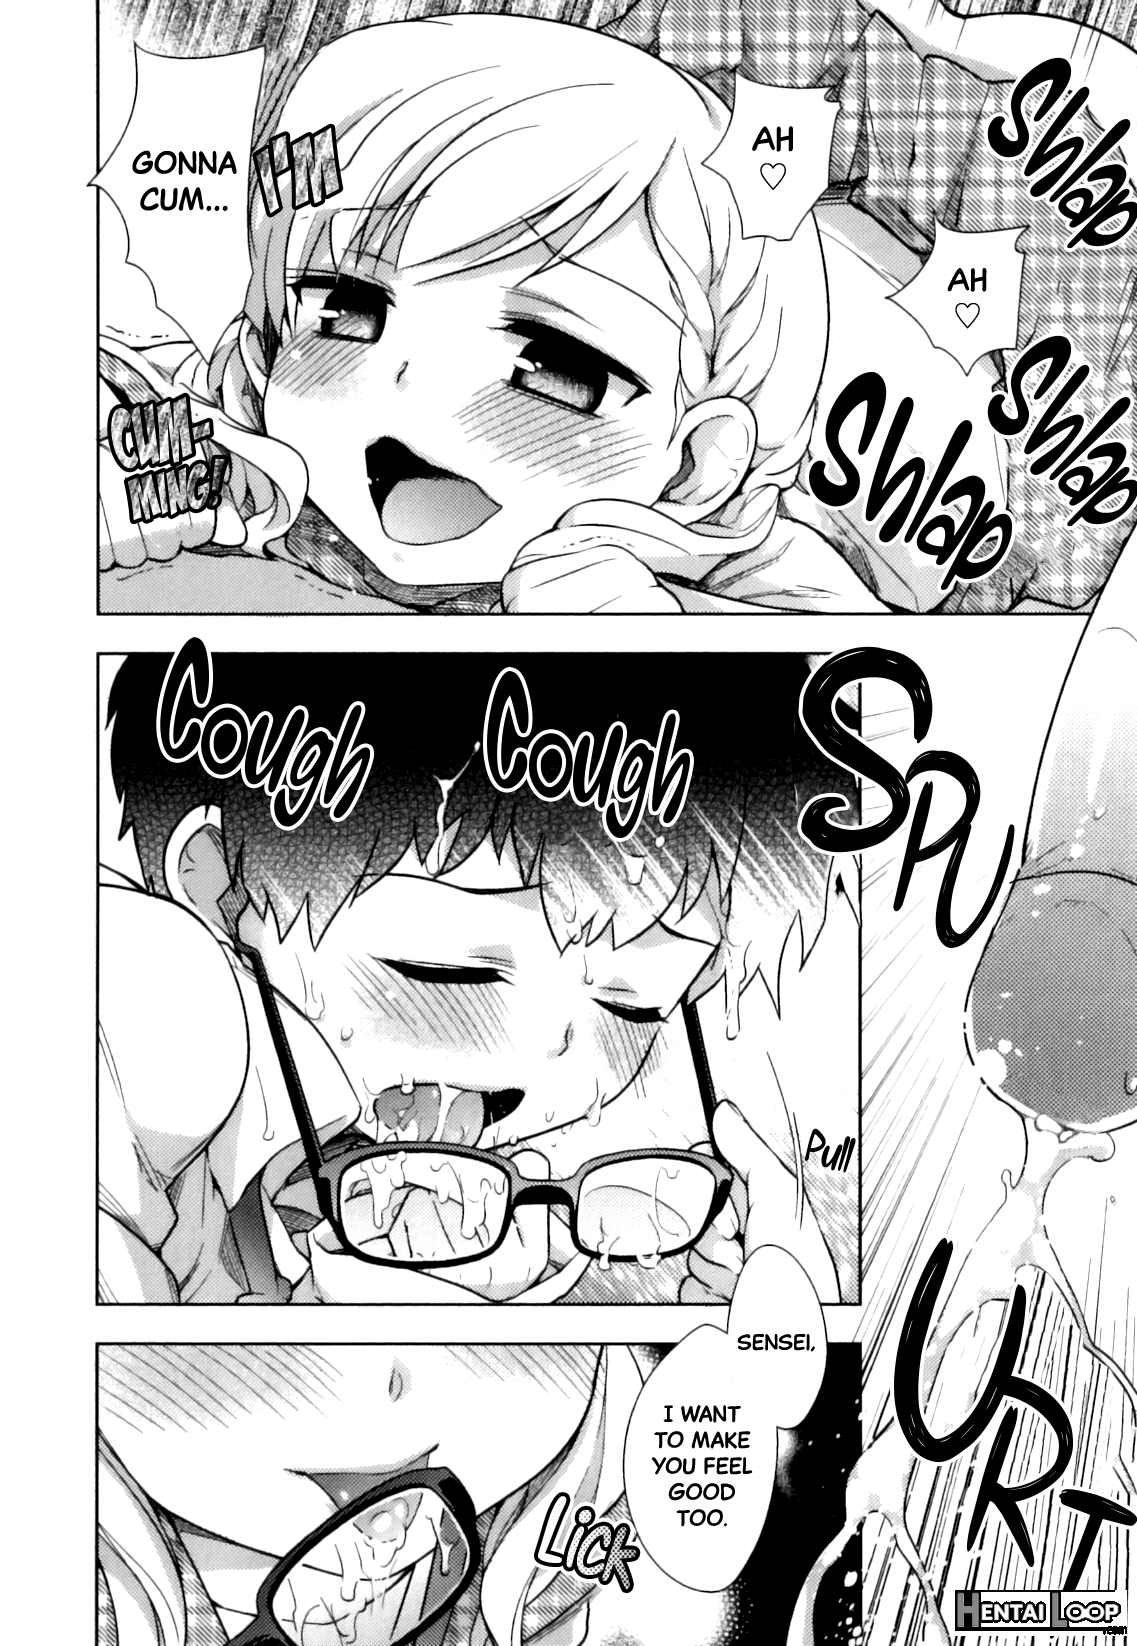 Love S-size page 8